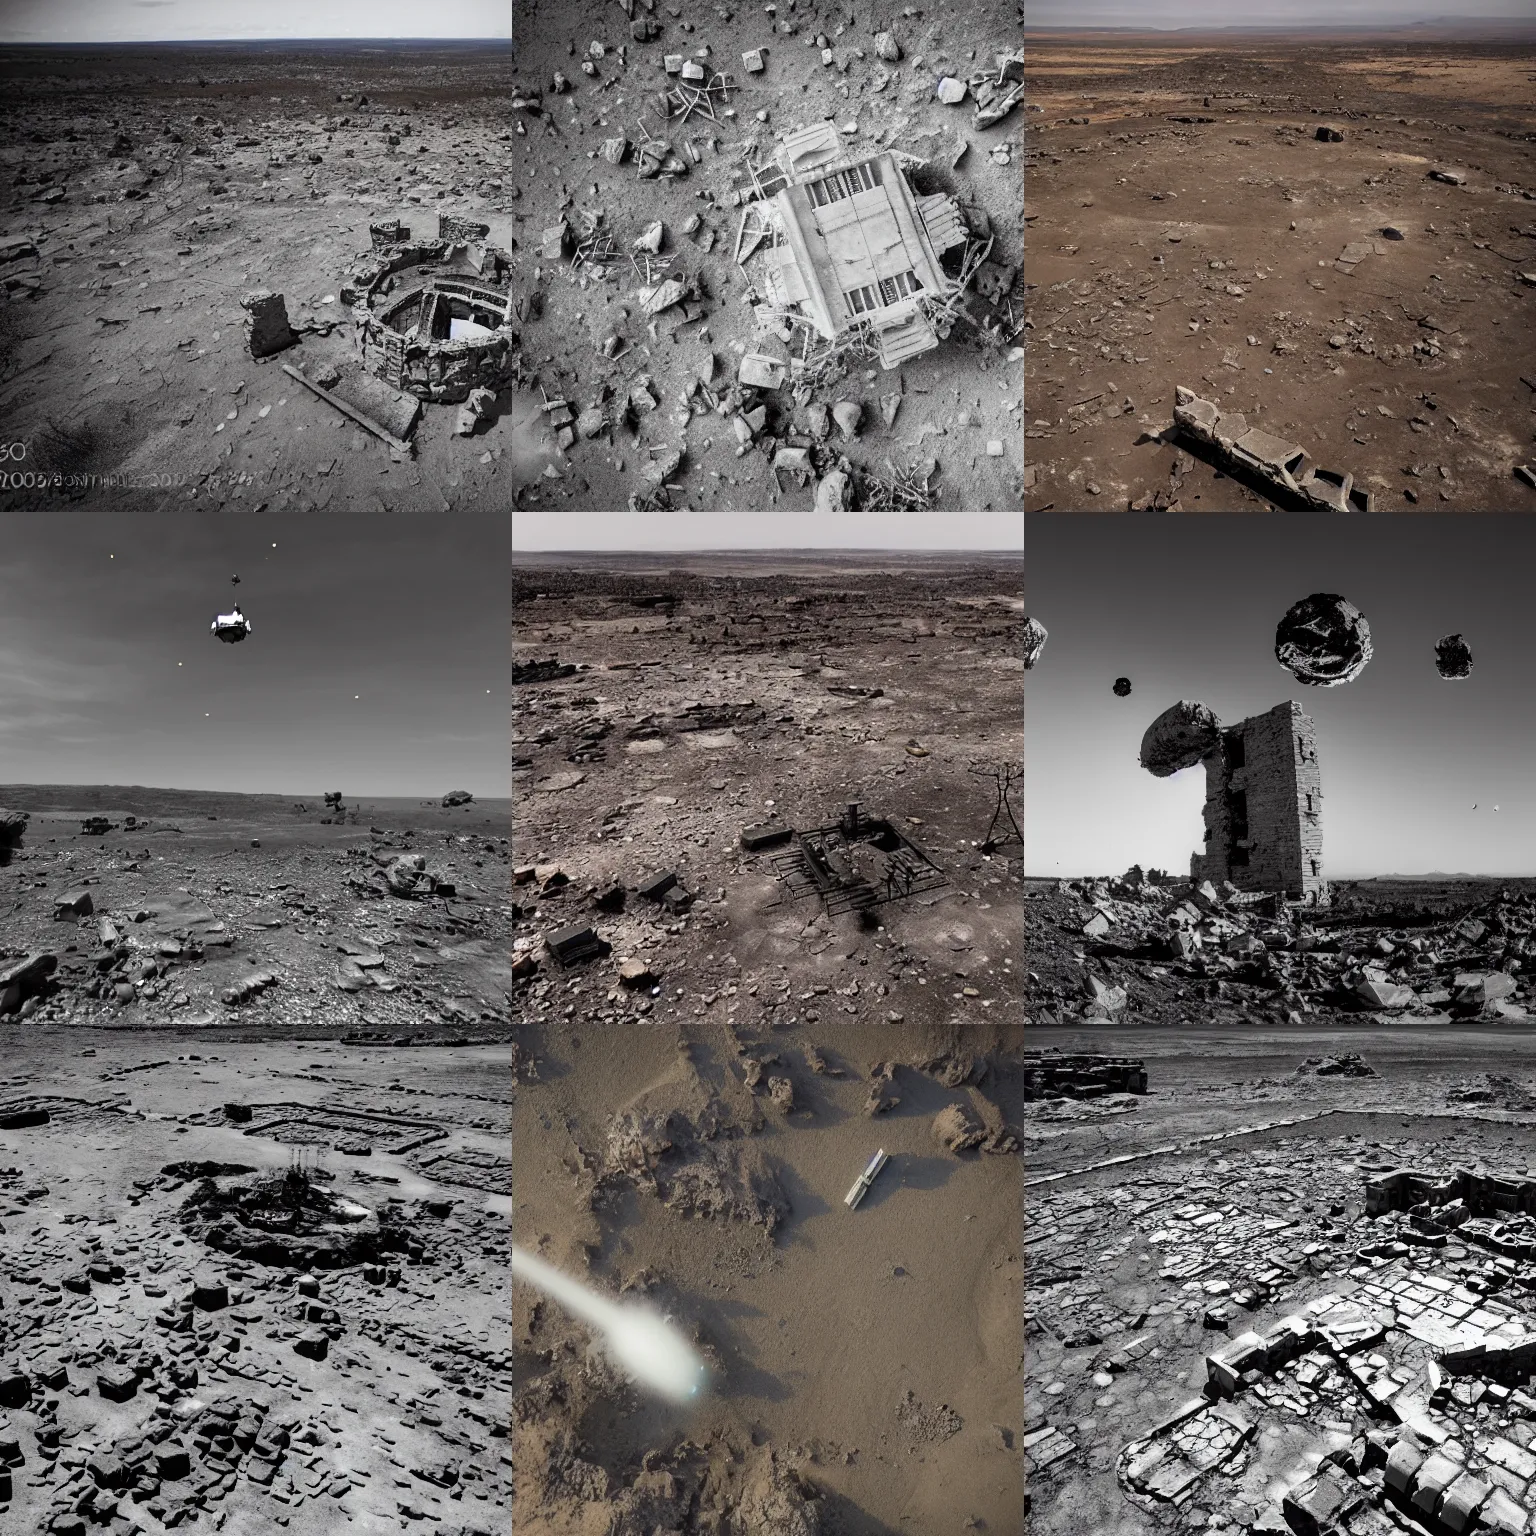 Prompt: photograph, desolate ruins on a distant planet with orbiting debris, drones surveying